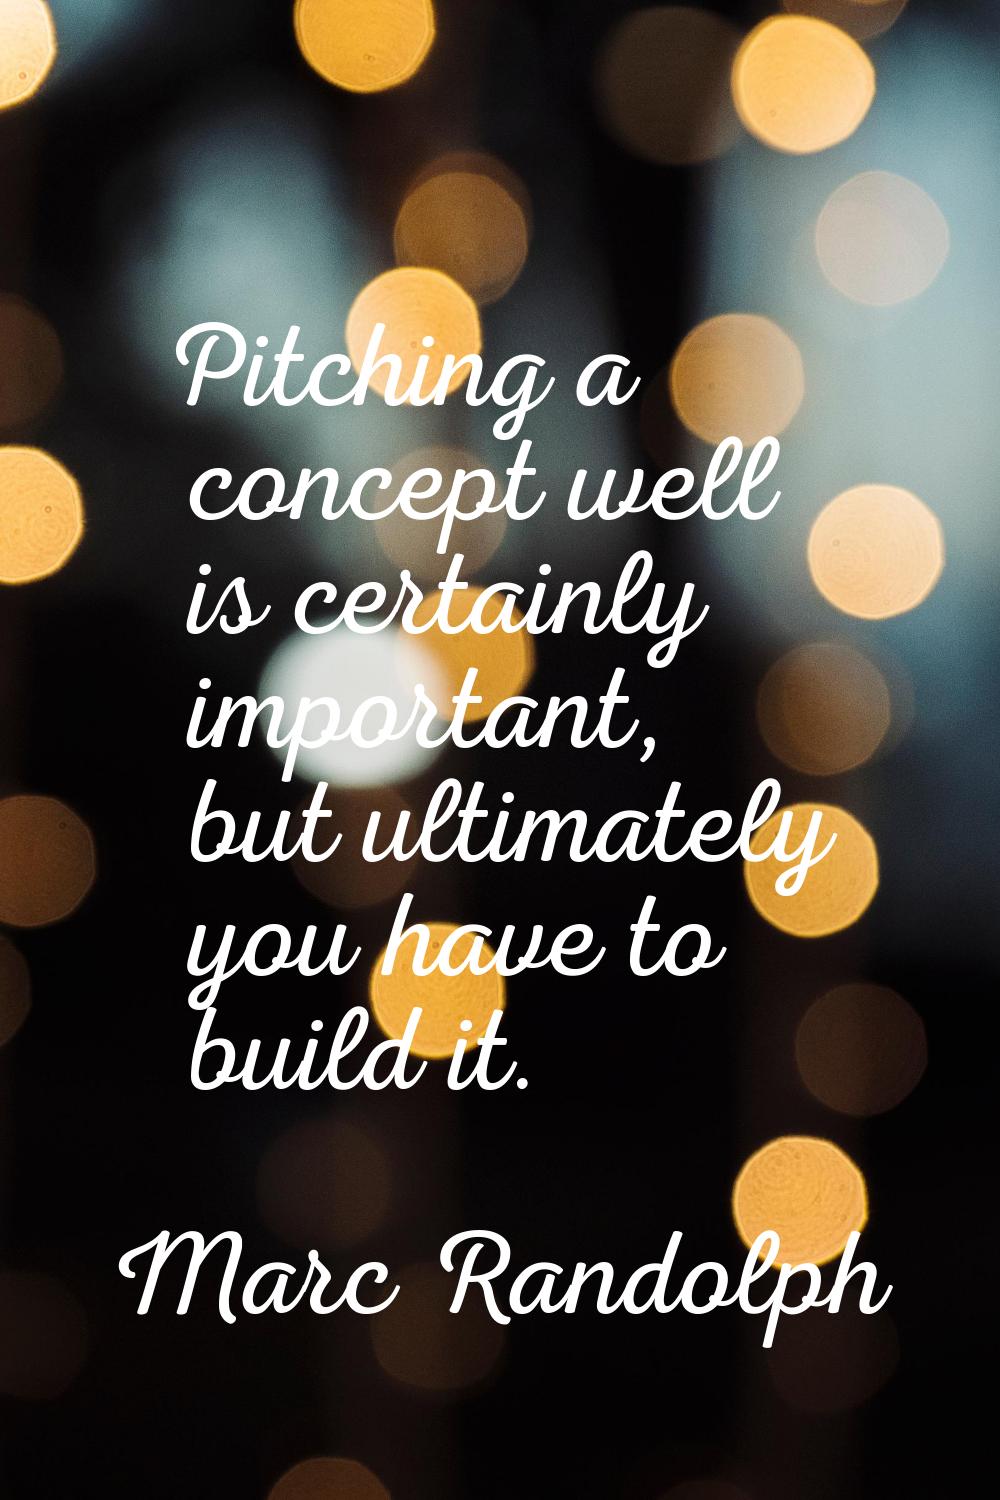 Pitching a concept well is certainly important, but ultimately you have to build it.